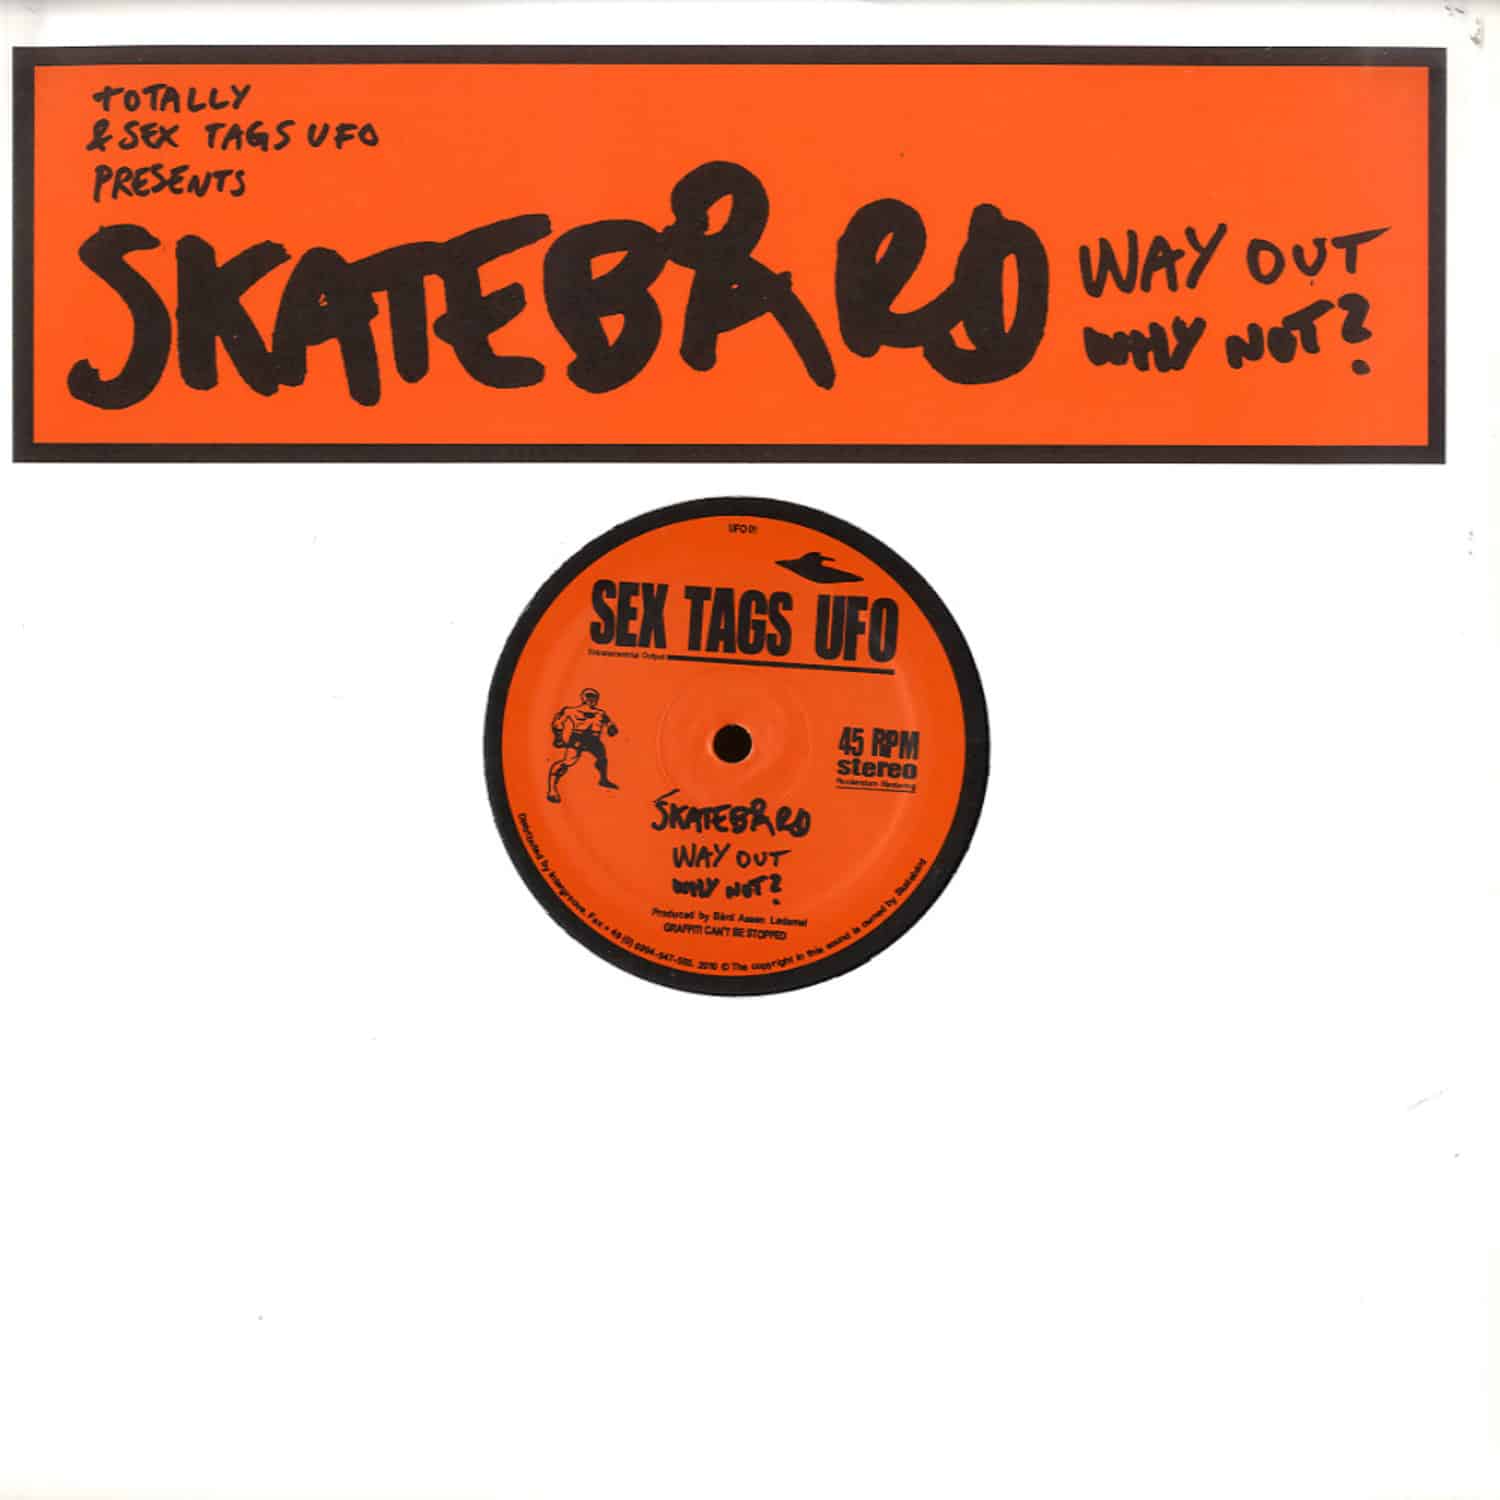 Skatebard - WAY OUT / WHY NOT?